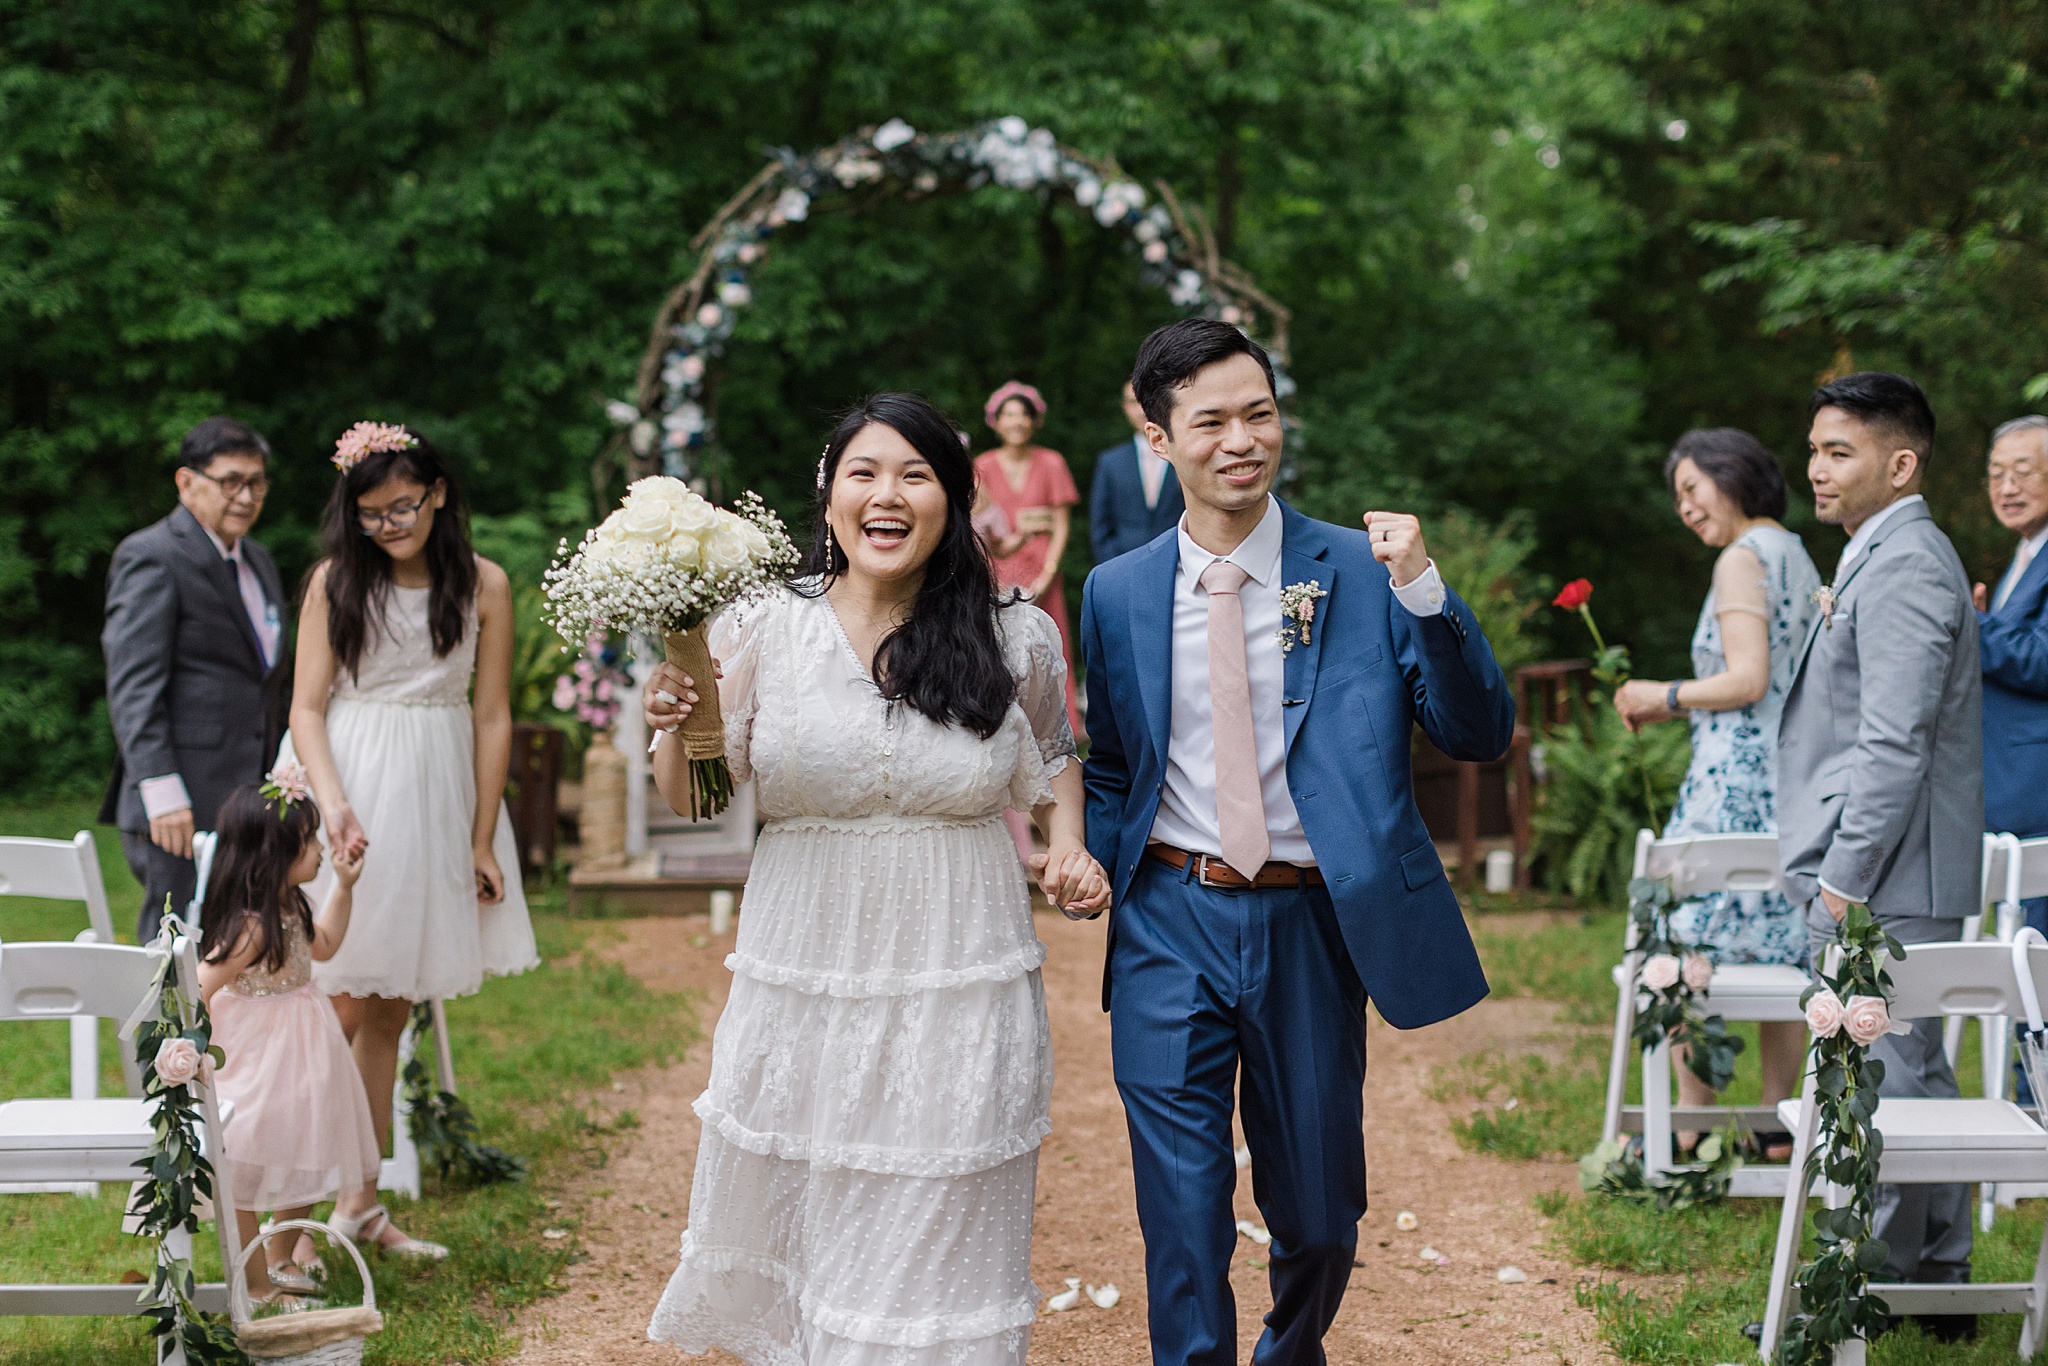 Asian bride and groom walking down the aisle after the conclusion of their wedding ceremony. They are both smiling and celebrating while holding hands and reaching up into the air. The bride is wearing a detailed white dress, a floral hair piece, and holds a bouquet of white roses. The groom is wearing a blue suit, white dress shirt, pale pink tie, and boutonniere. They are surrounded by wedding guests who are also celebrating. In the background is the wedding officiant and large wooden wedding arch covered in flowers in front of a wooded background.